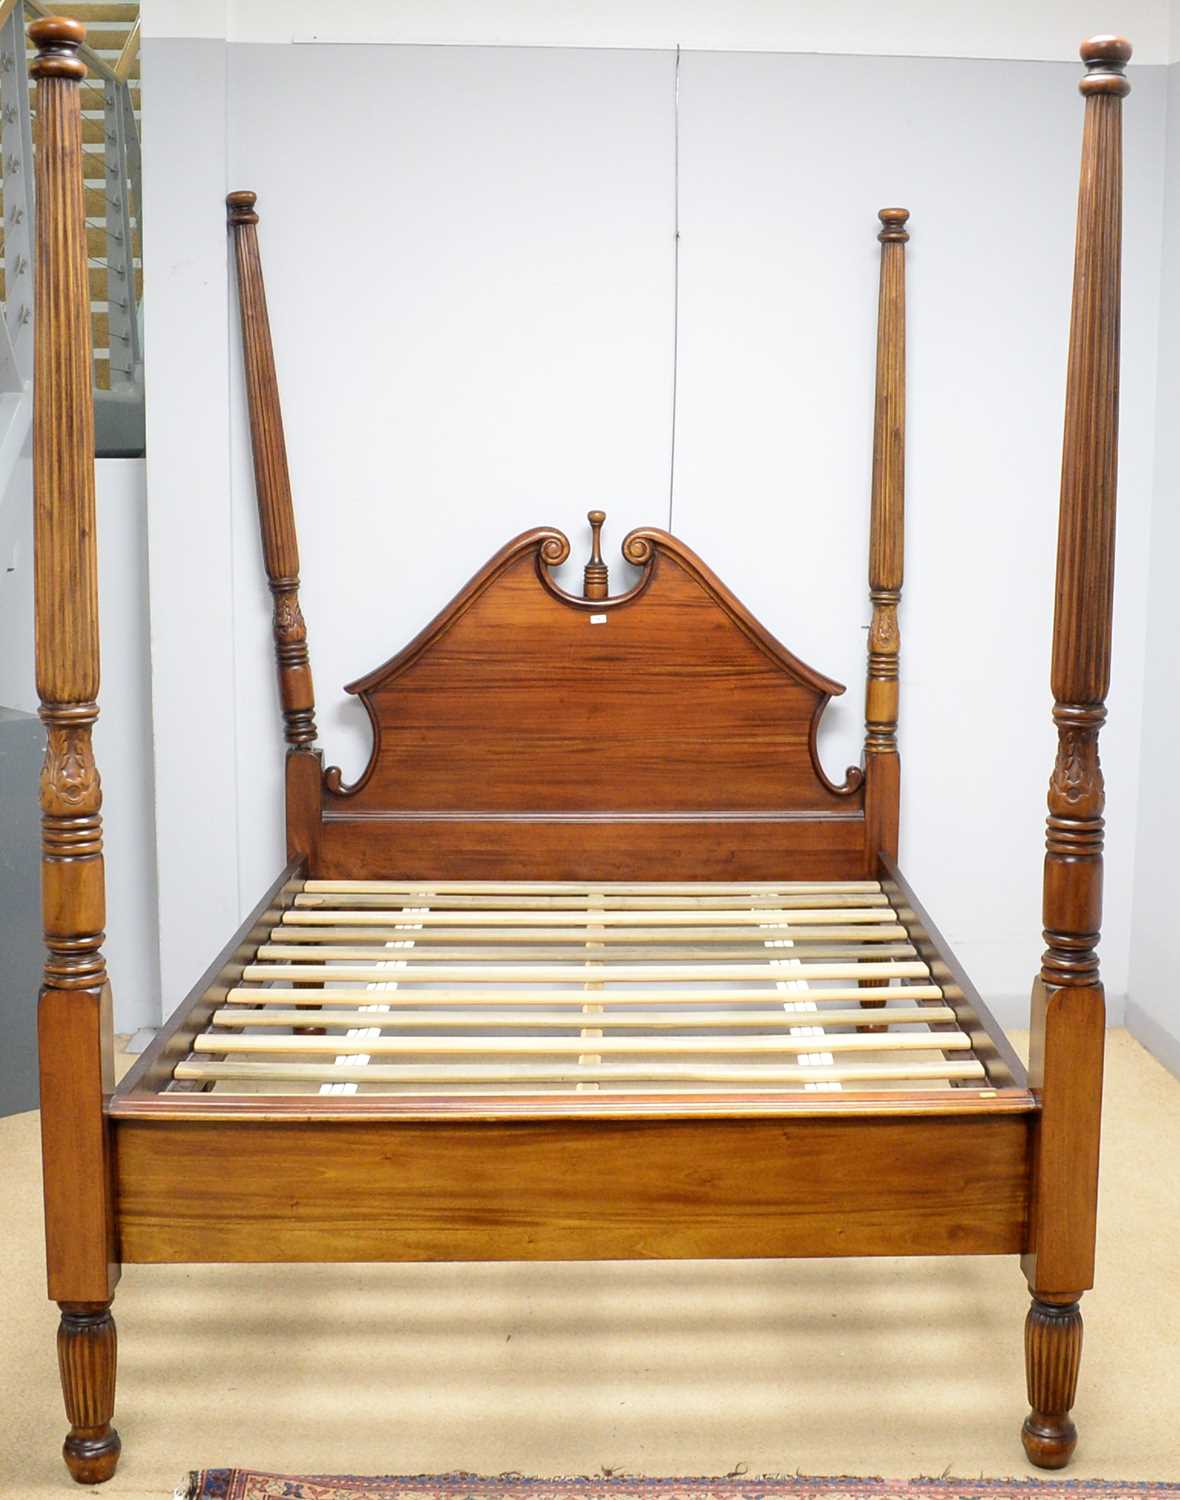 Lot 70 - A Regency style mahogany four poster double bed